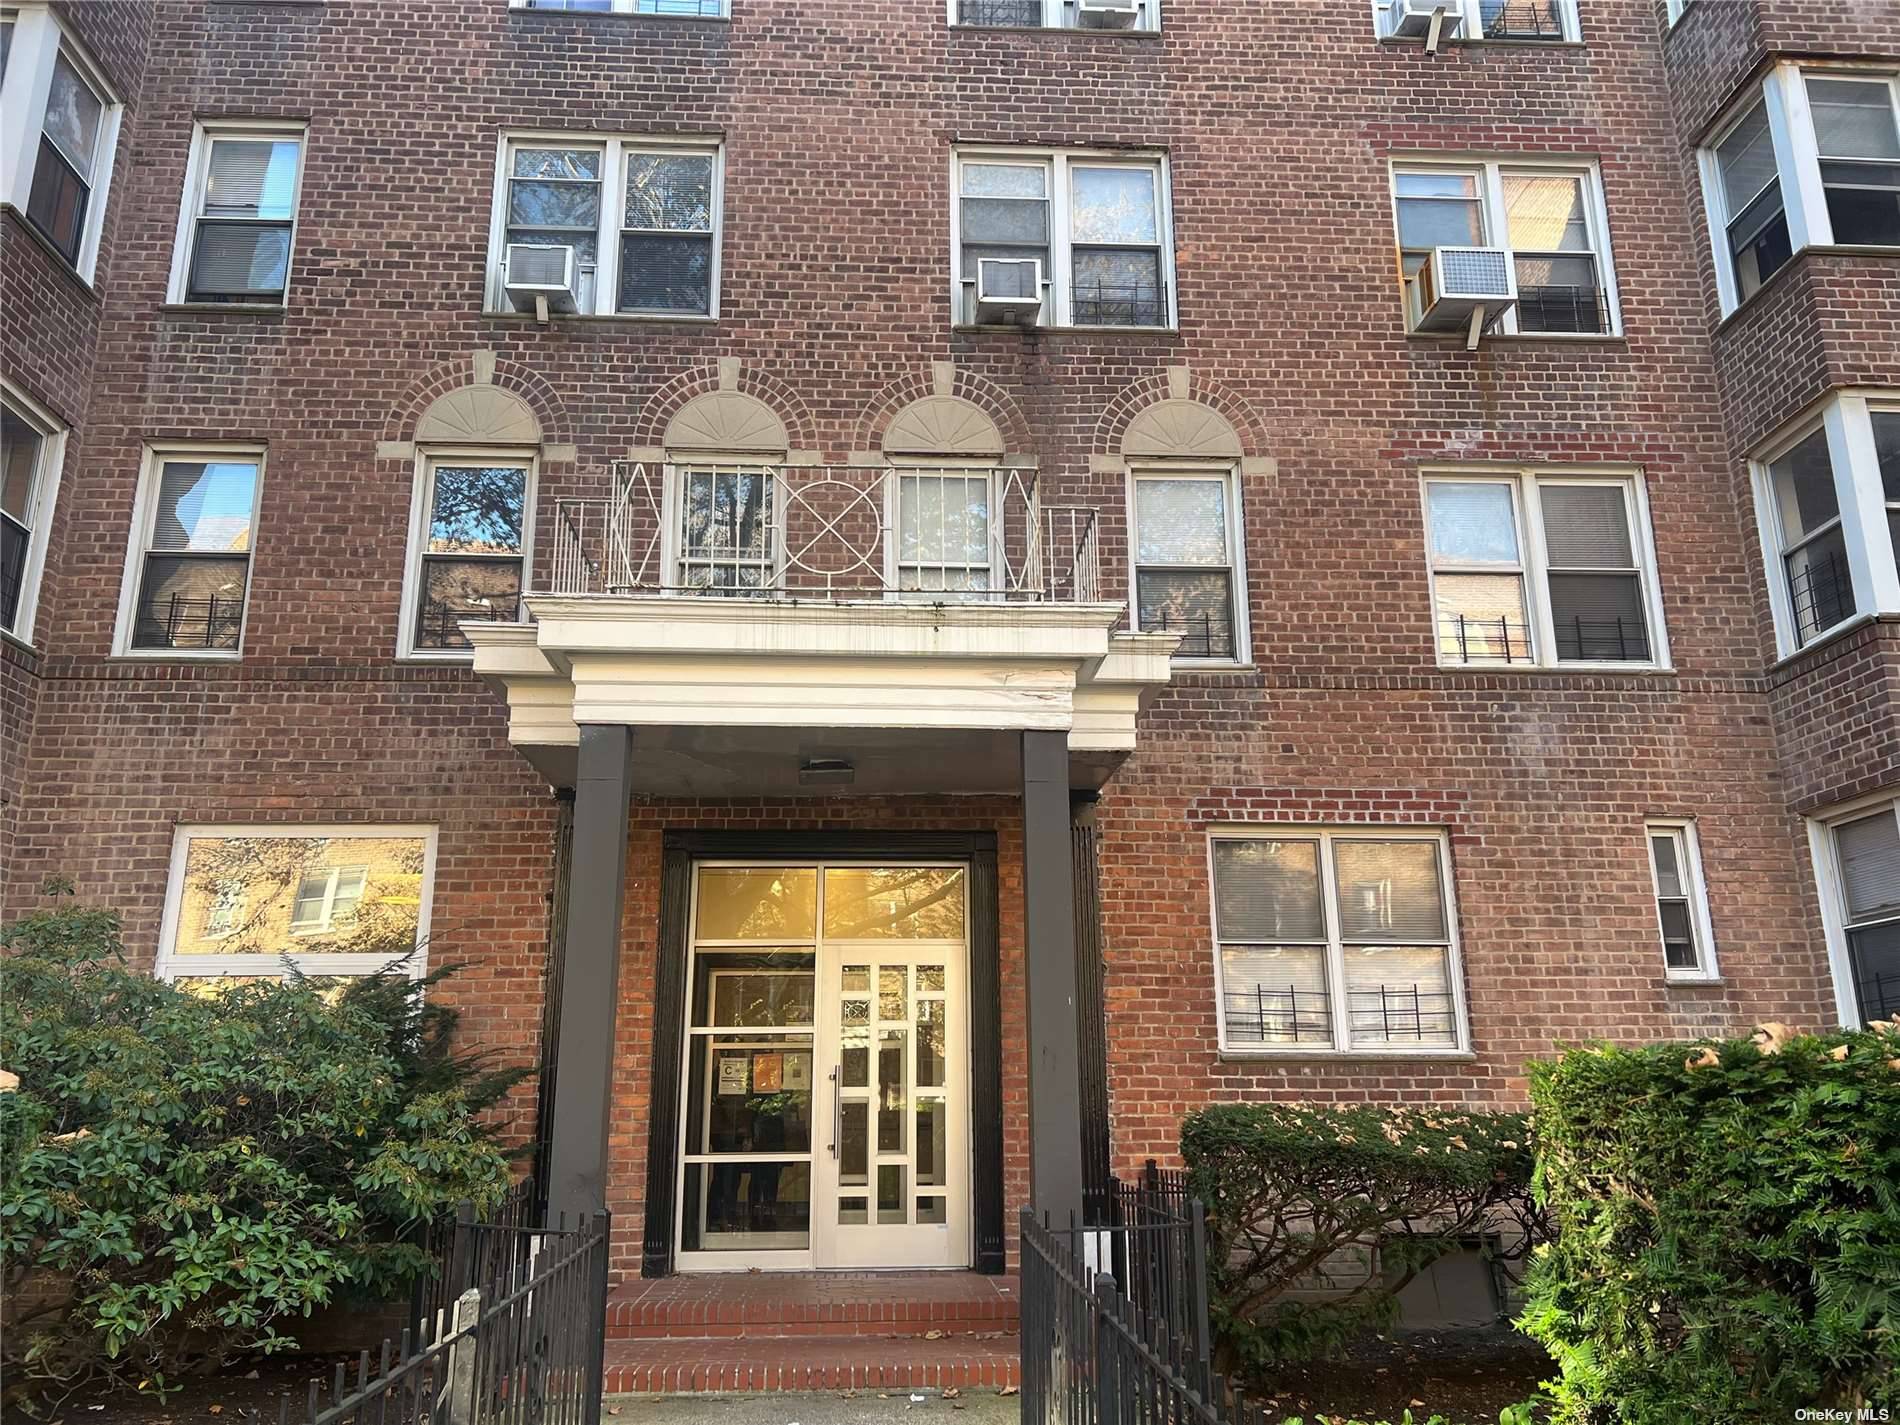 2 Bedroom co op located on the 6th floor in an elevator building ; Close proximity to schools, shopping, restaurants, banks, buses, train lines and more ; includes parking ; ...